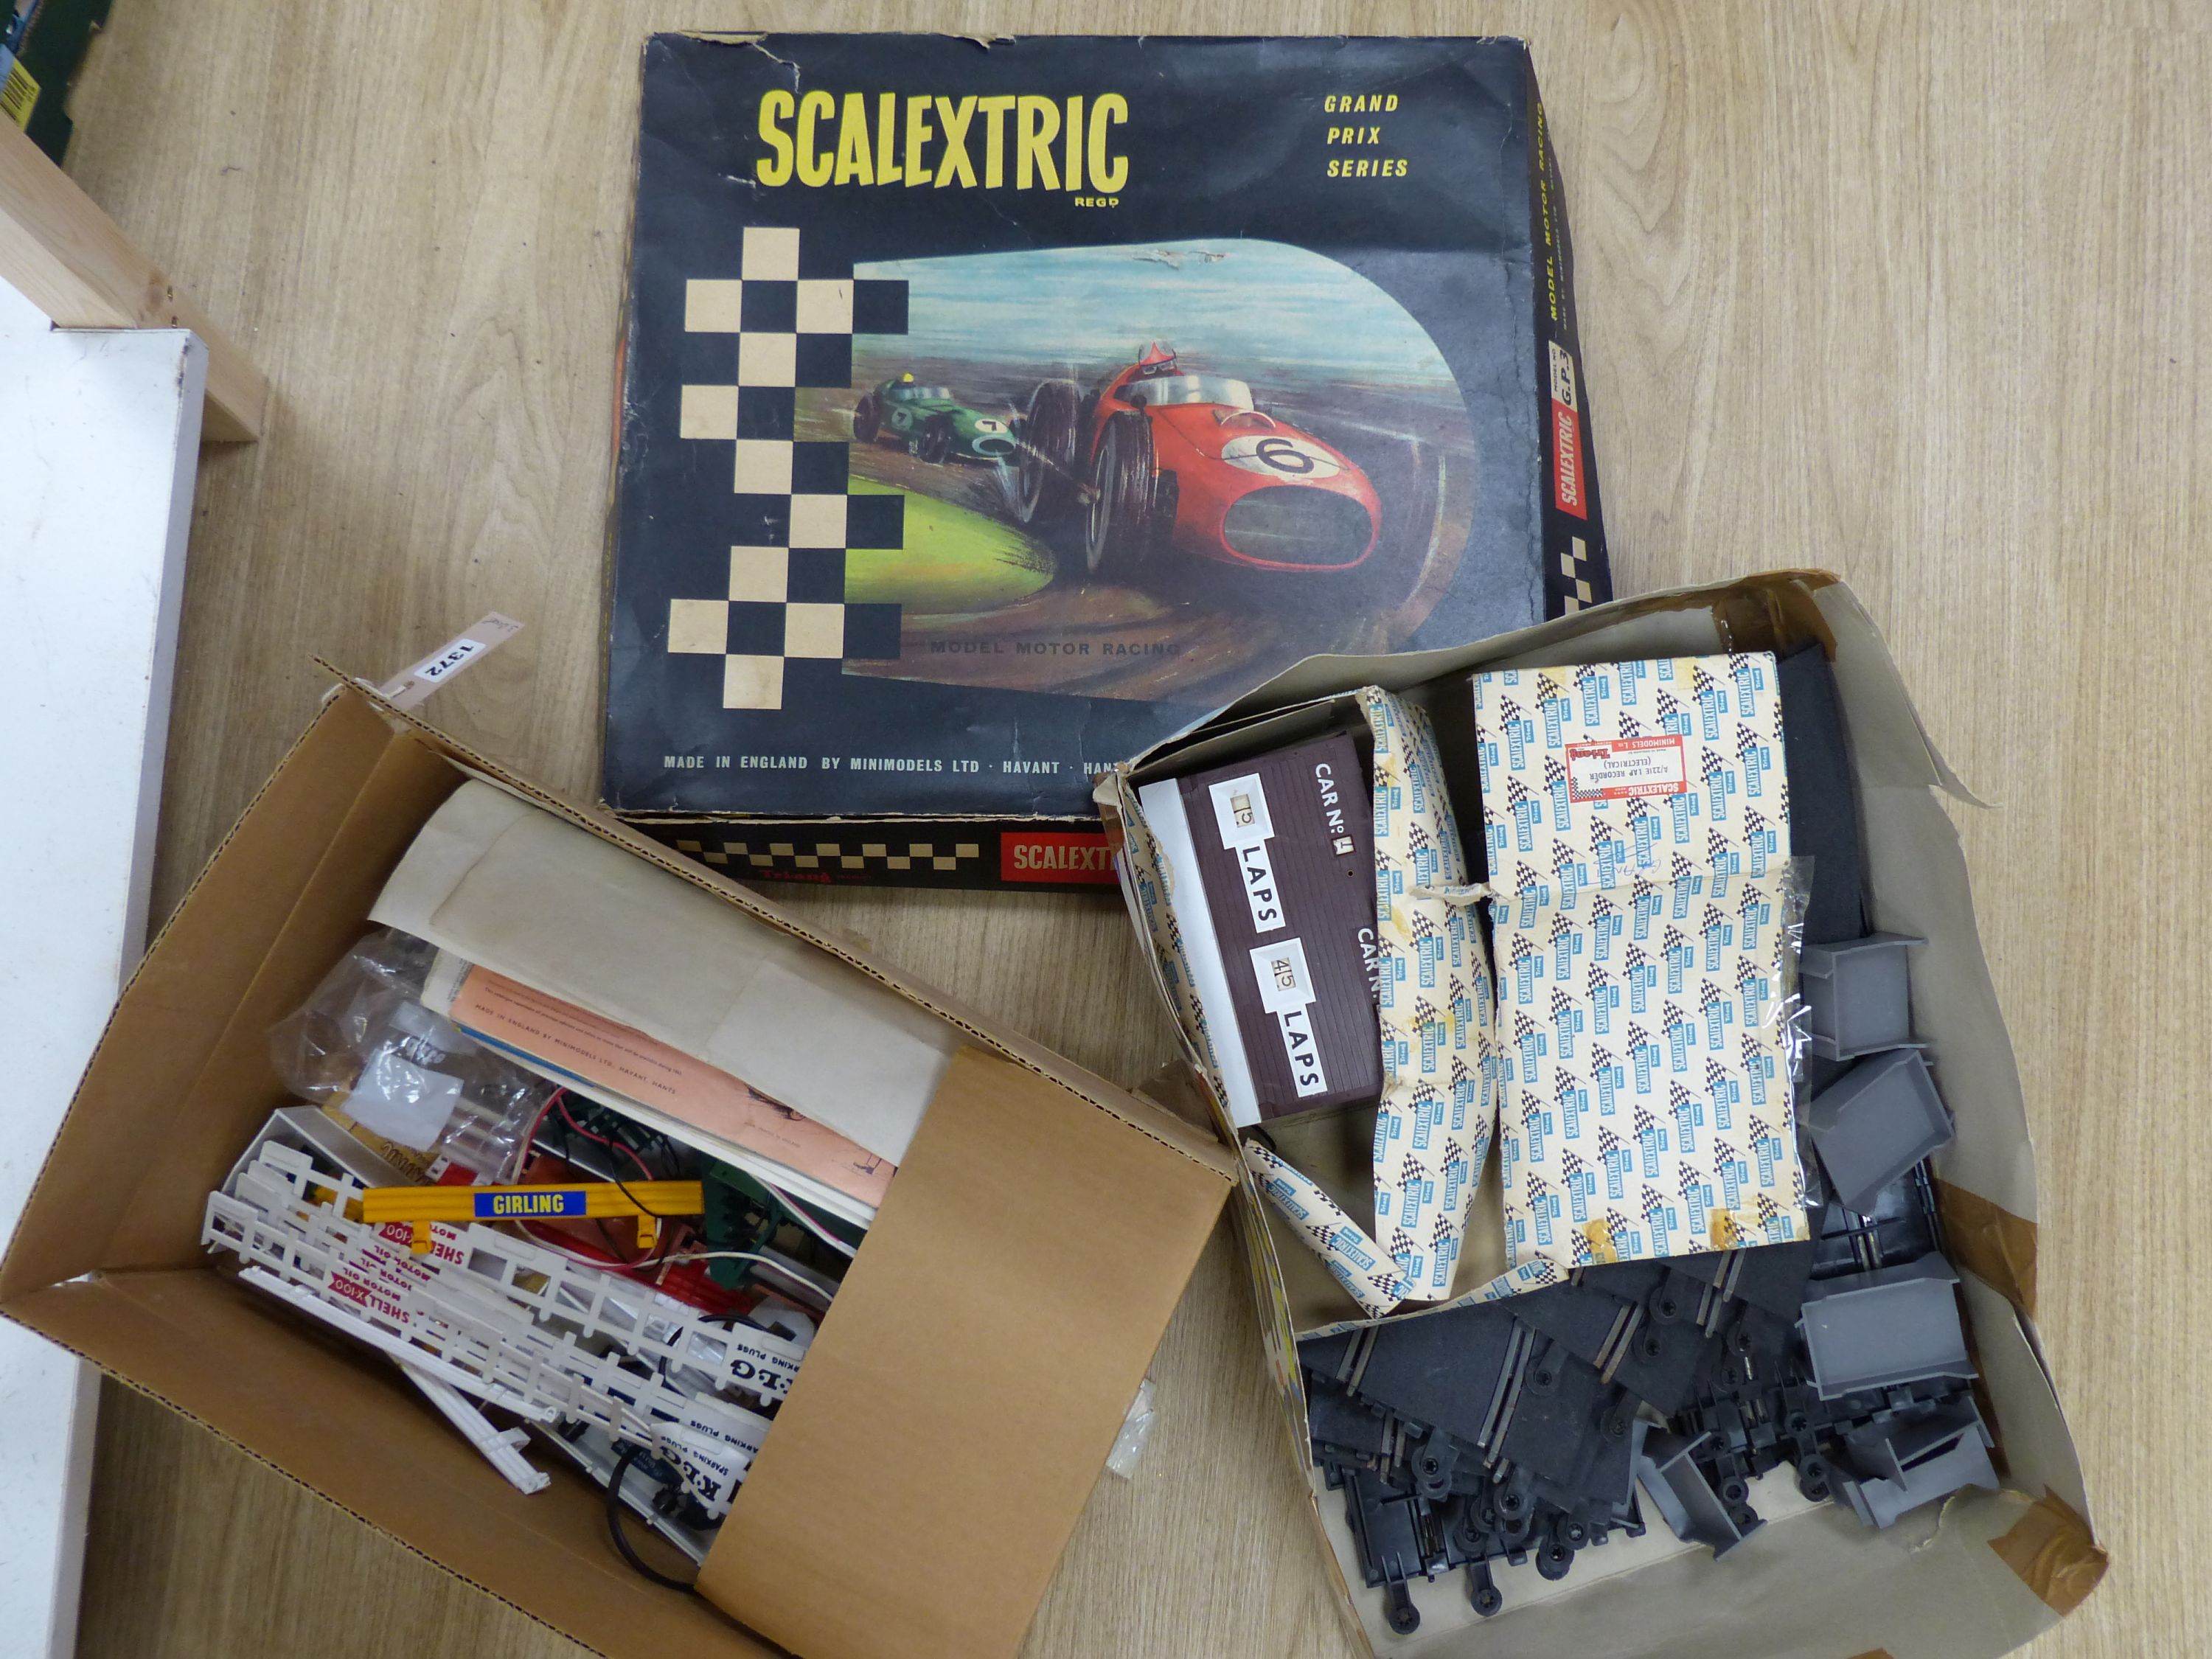 A quantity of Scalextric and accessories